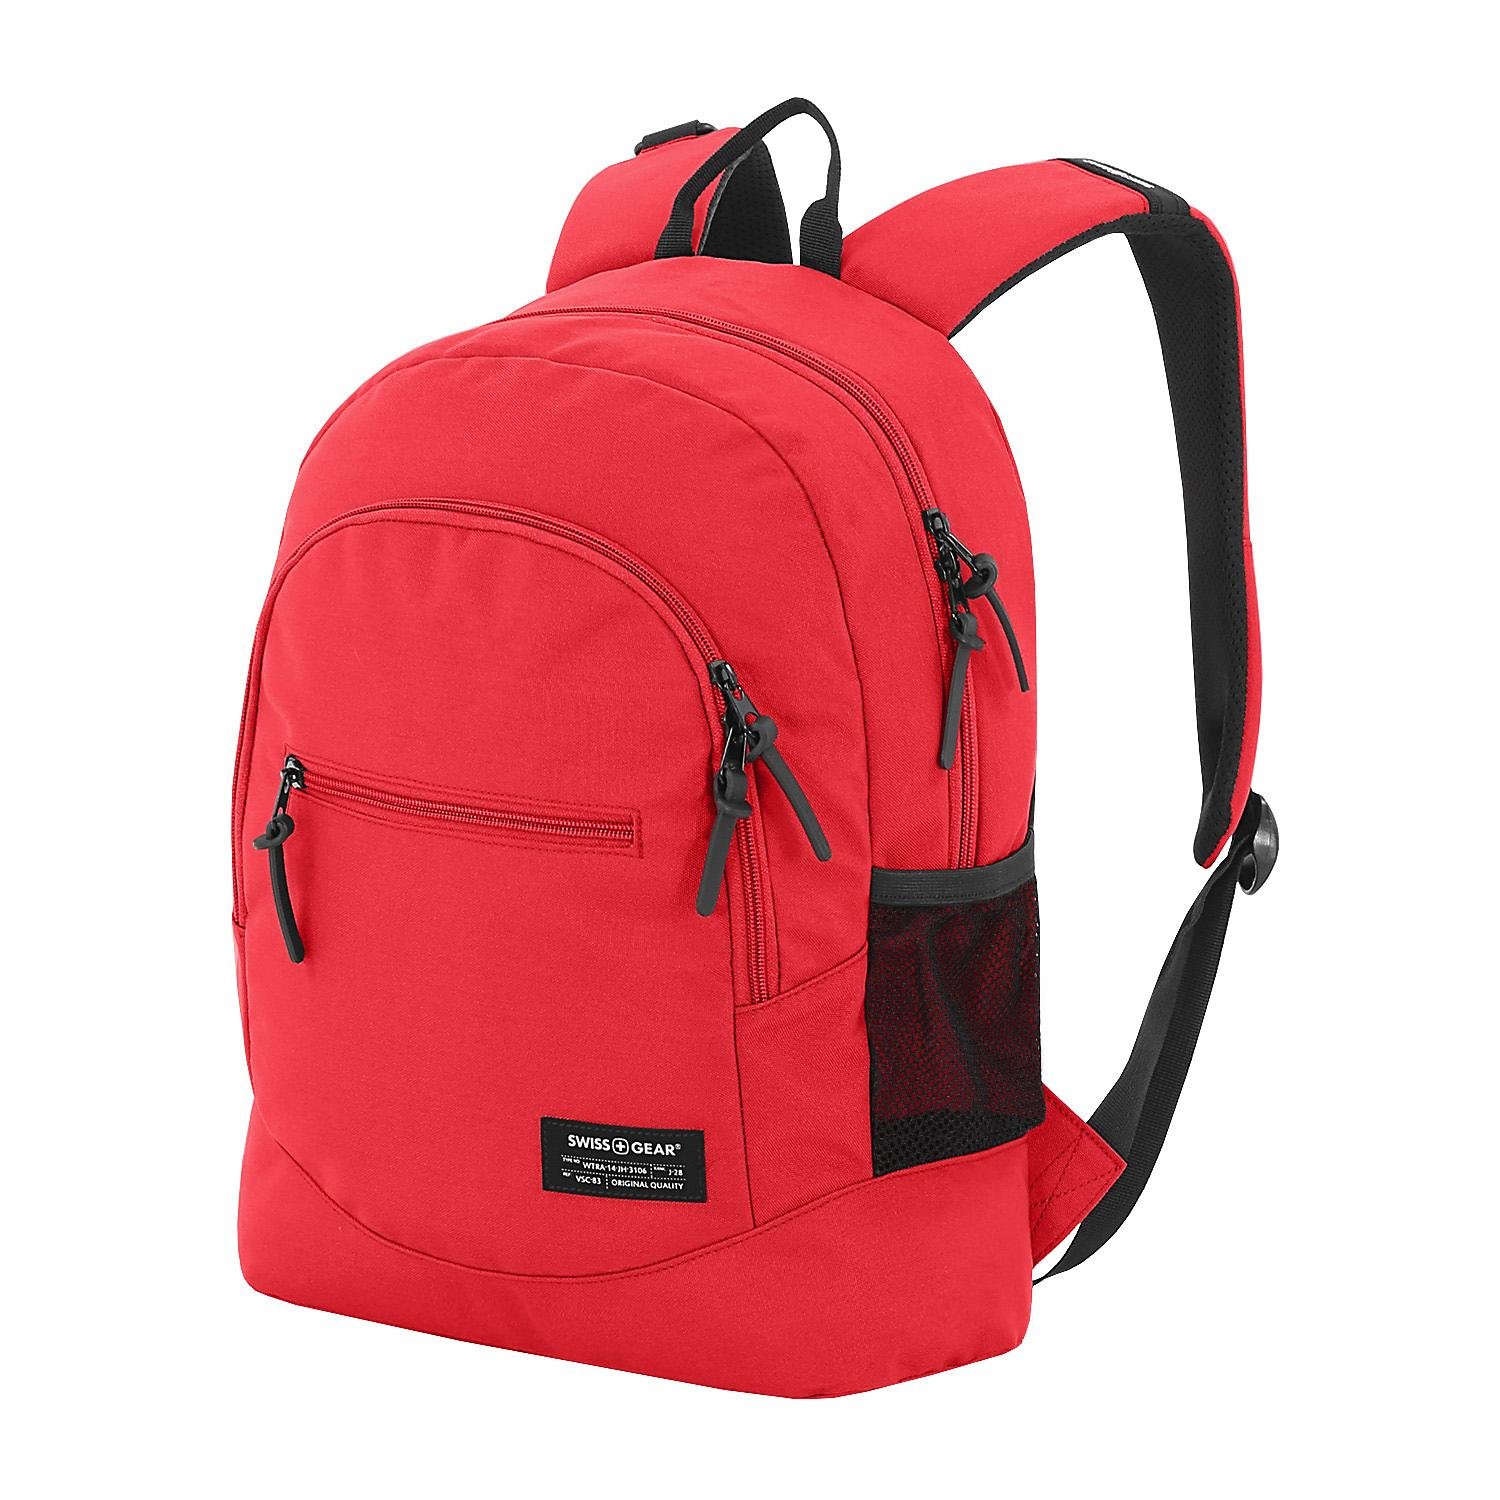 Swissgear Daypack - Choose One/Color